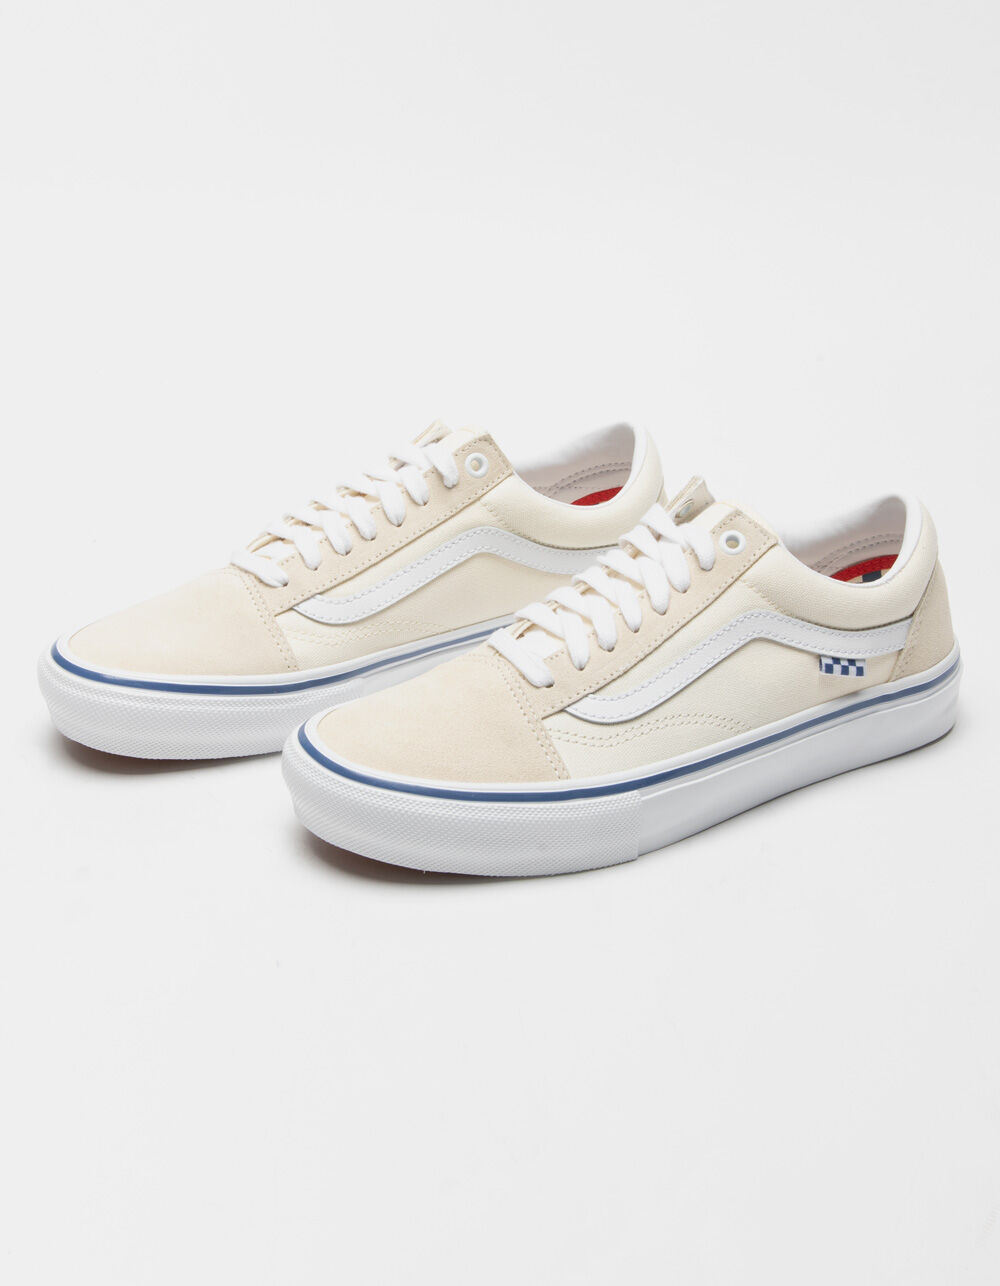 VANS OFF THE WALL SKATE OLD SKOOL SHOES WHITE/GRAY CUSTOM ANARCHY